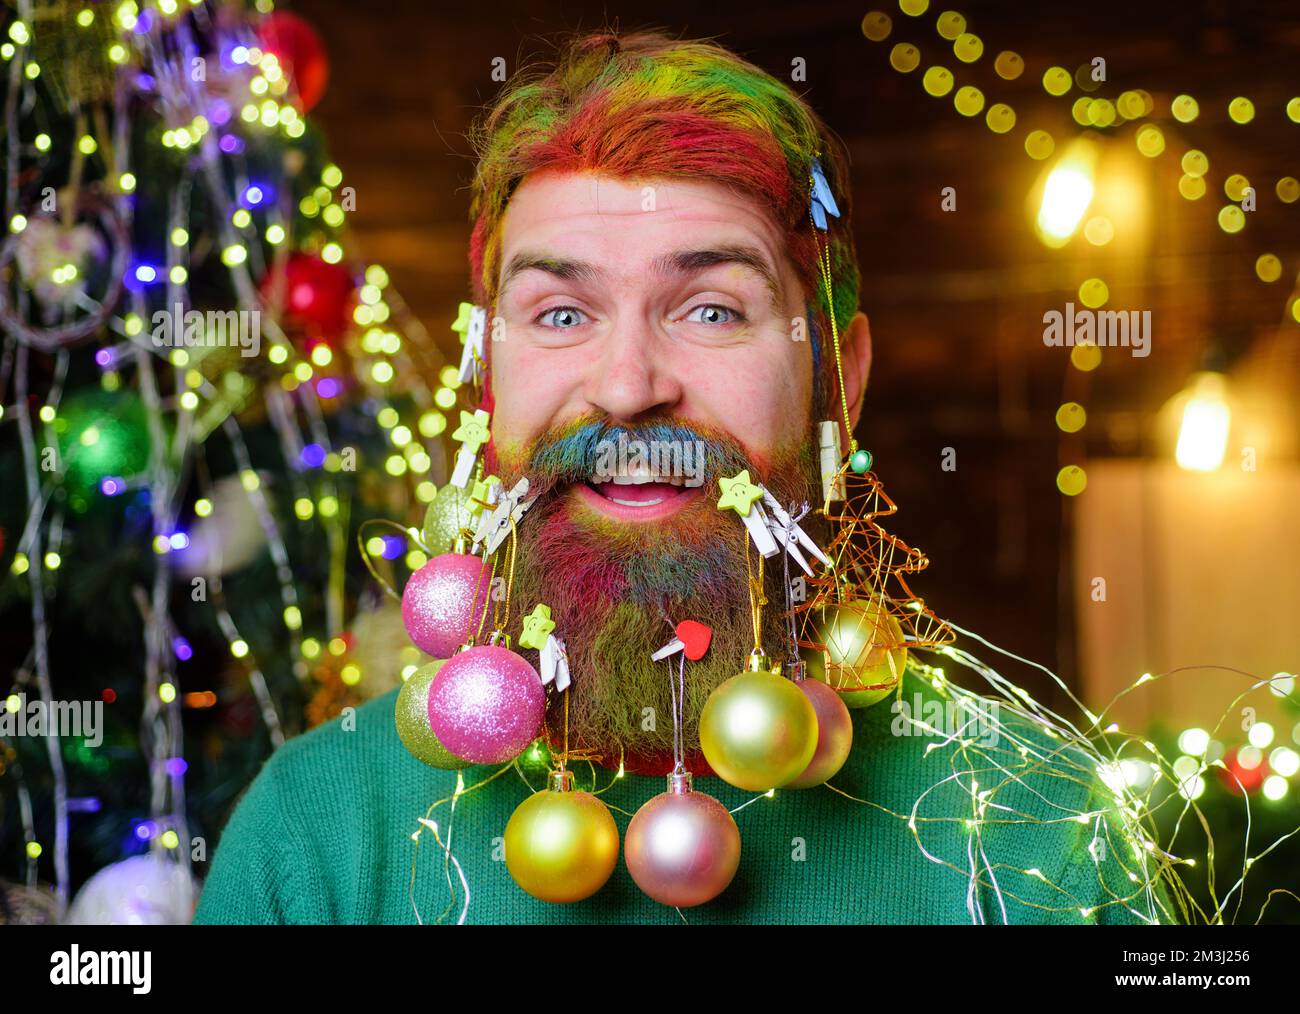 Happy bearded man with decorated beard. New year party. Christmas decorations. Winter holidays. Stock Photo